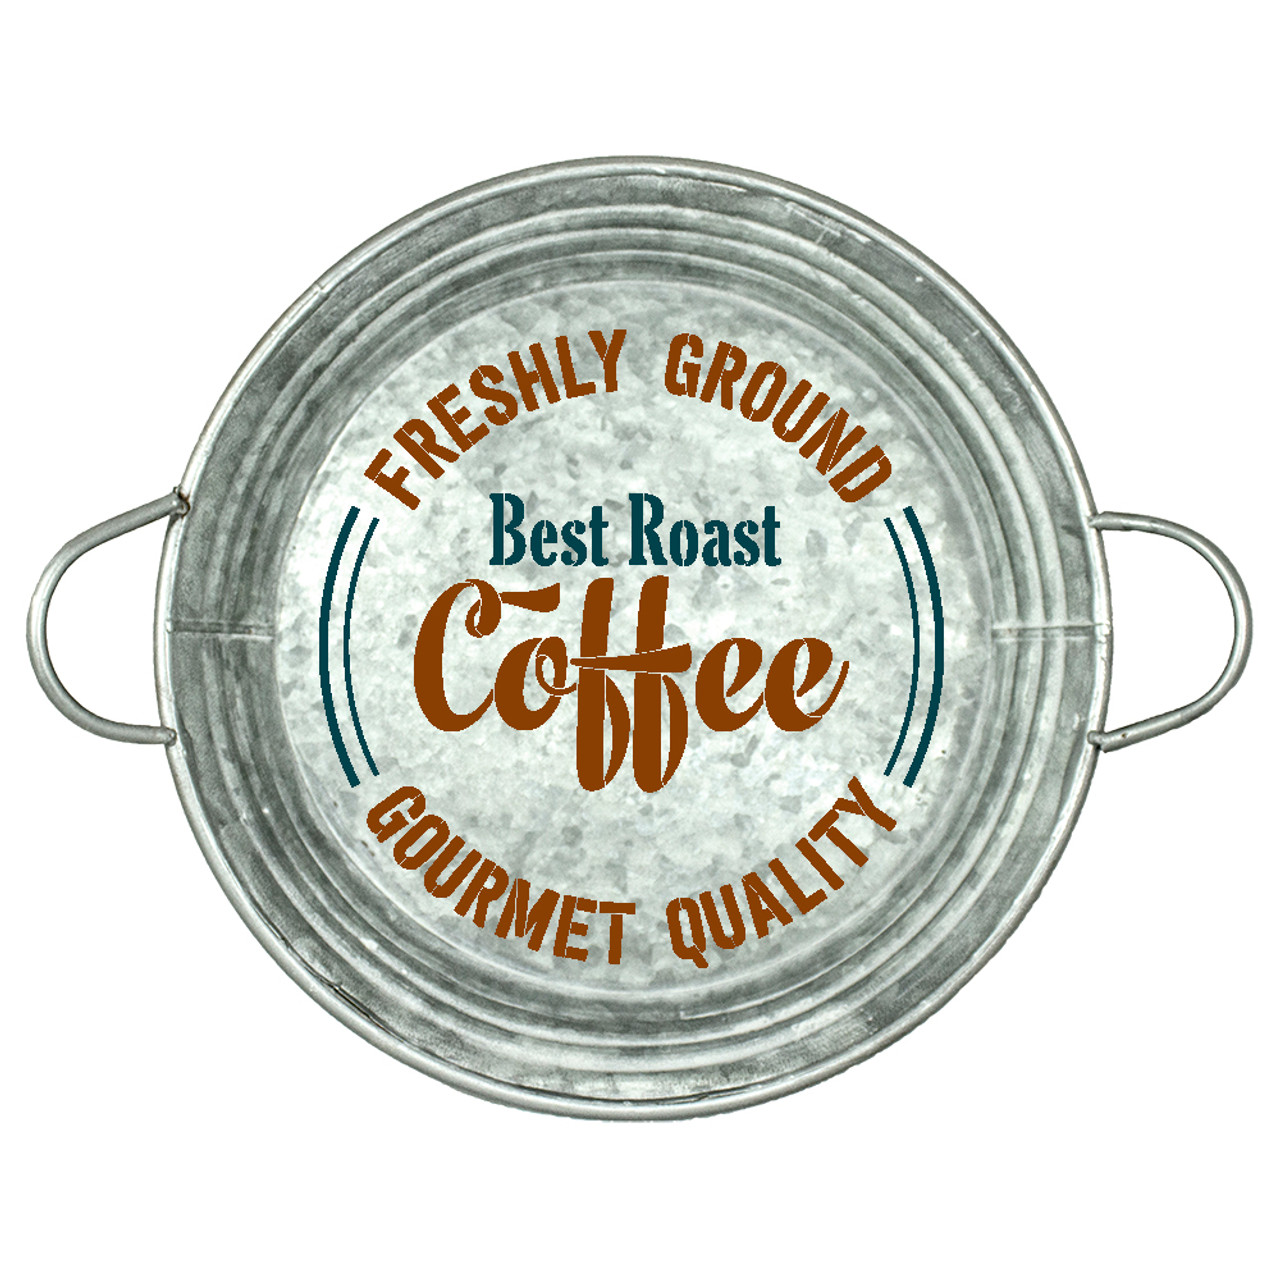 Best Roast Coffee | Freshly Ground | Gourmet Quality Stencil by StudioR12 | Coffee Art  | Reusable Mylar Template | 9.5" Round | Small